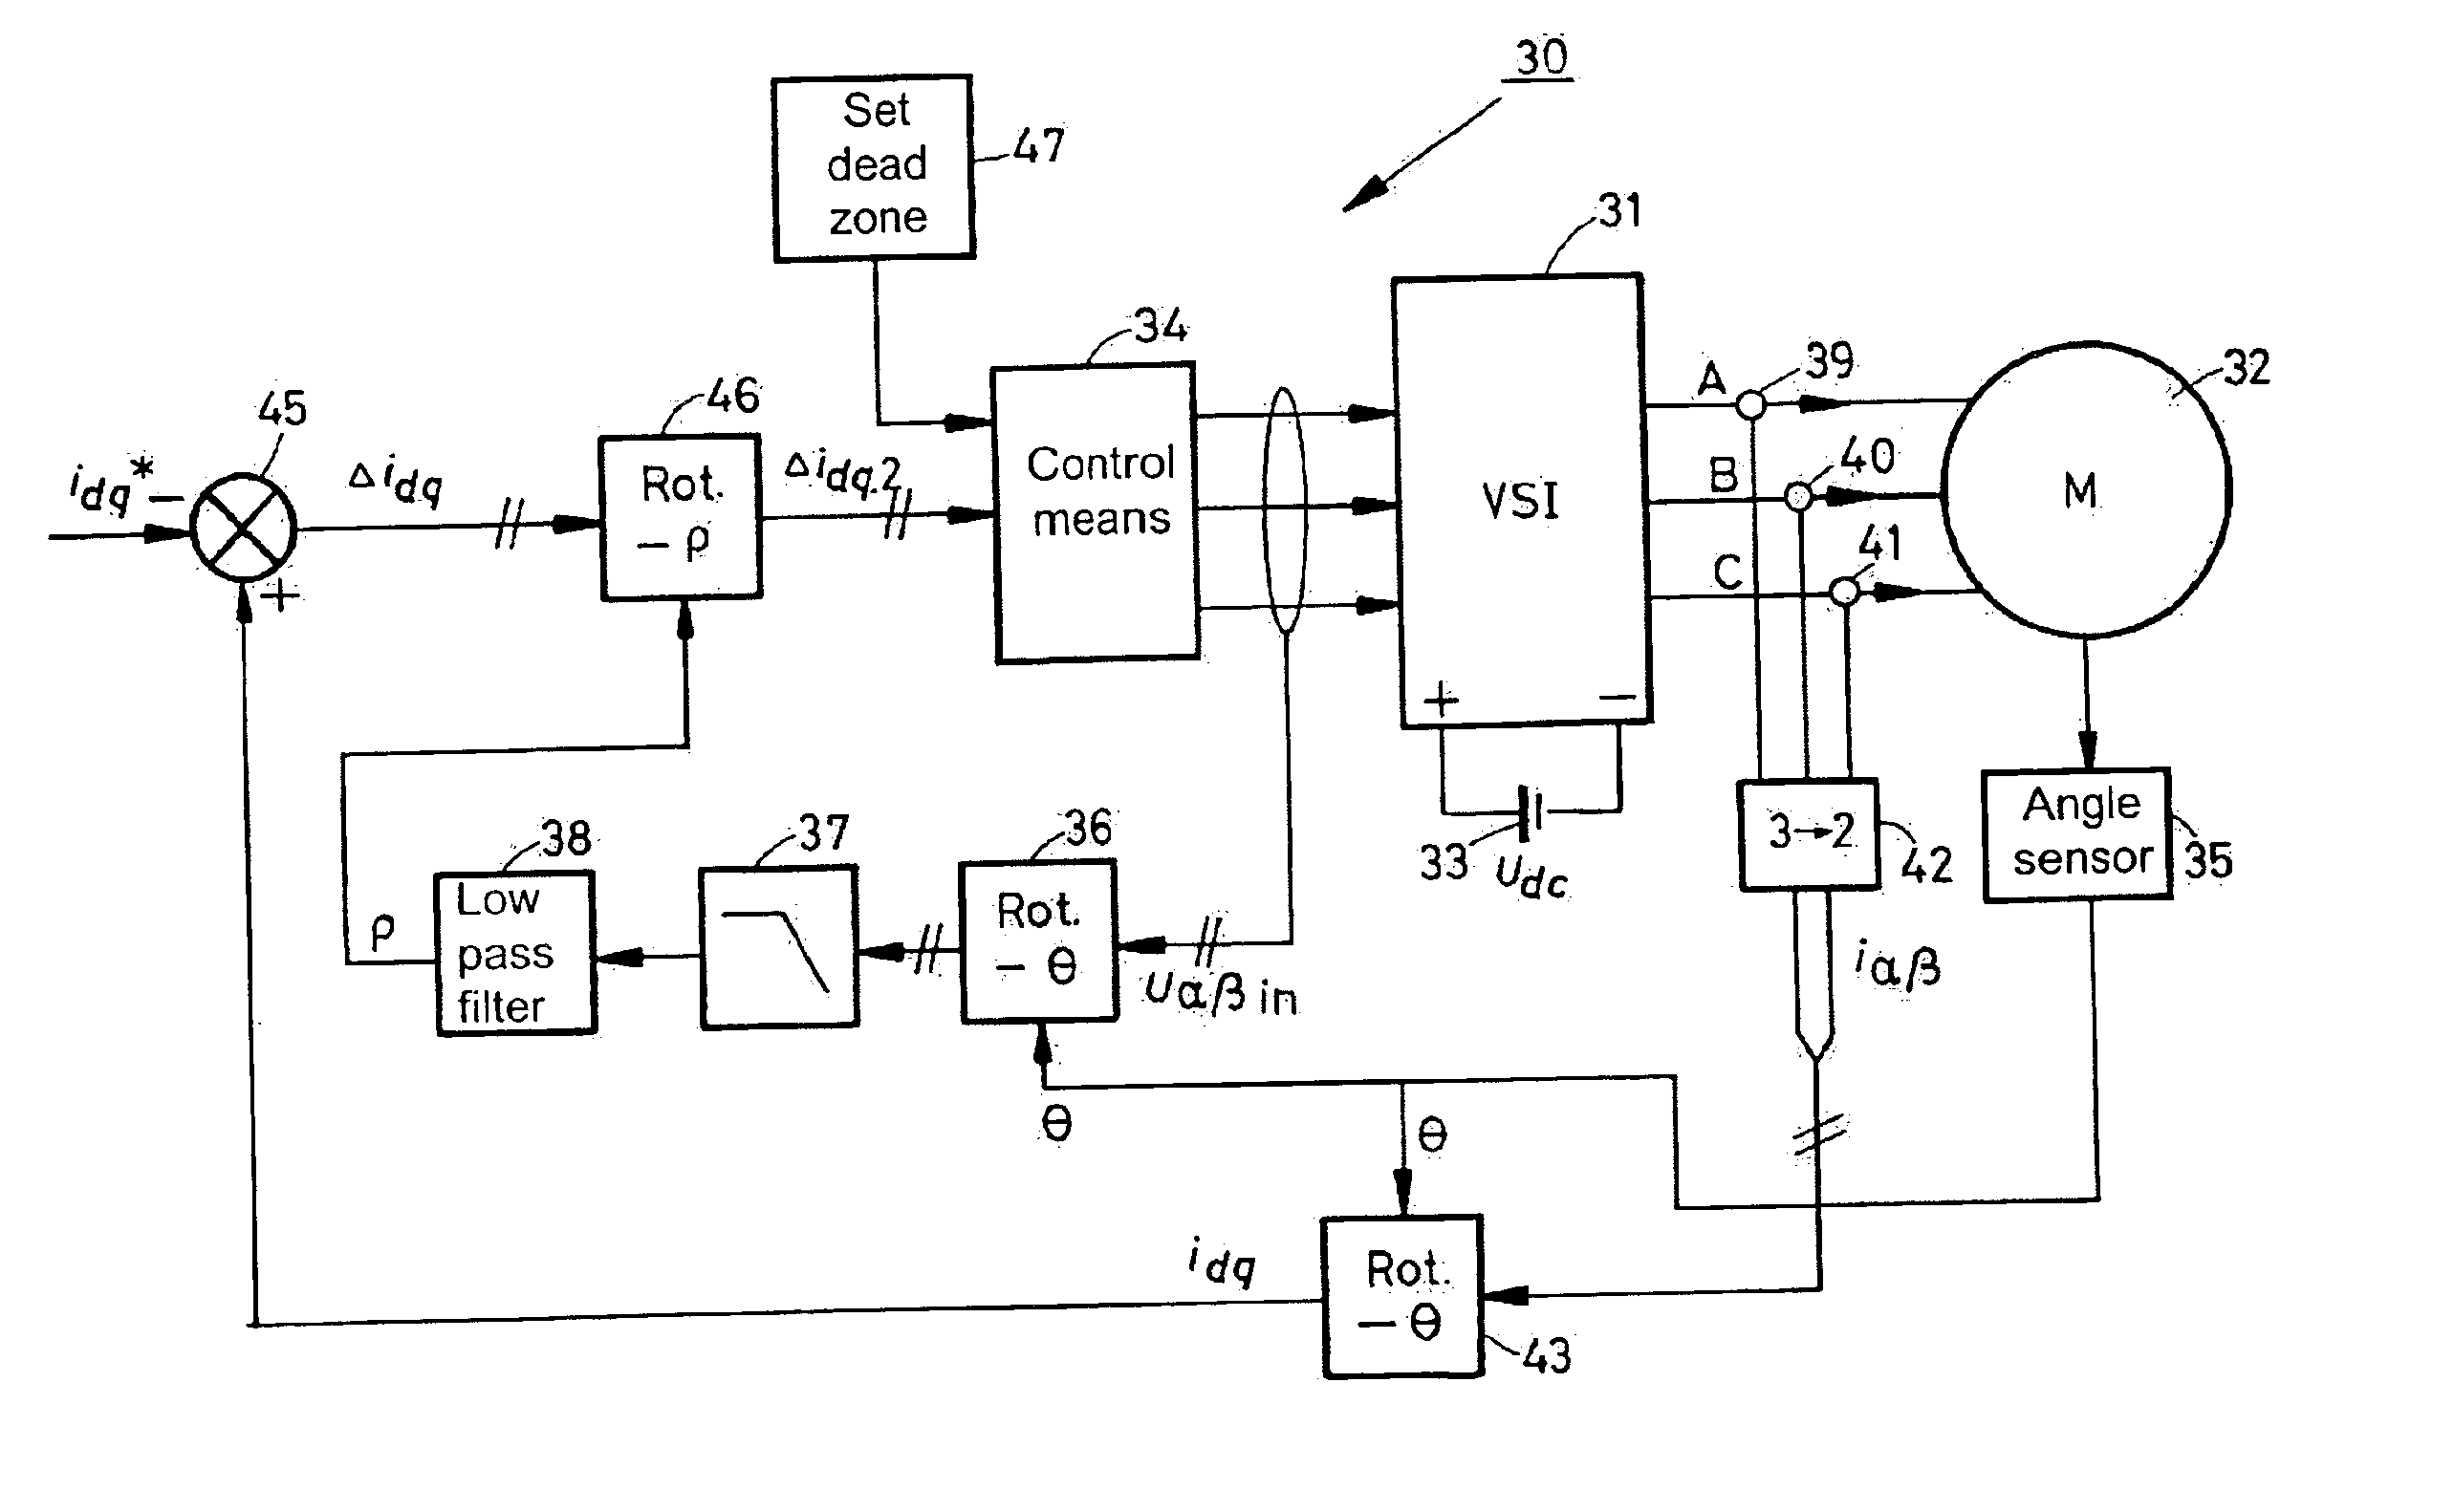 Method and device for controlling an electric load connected to a multiphase switchable DC/AC frequency convertor